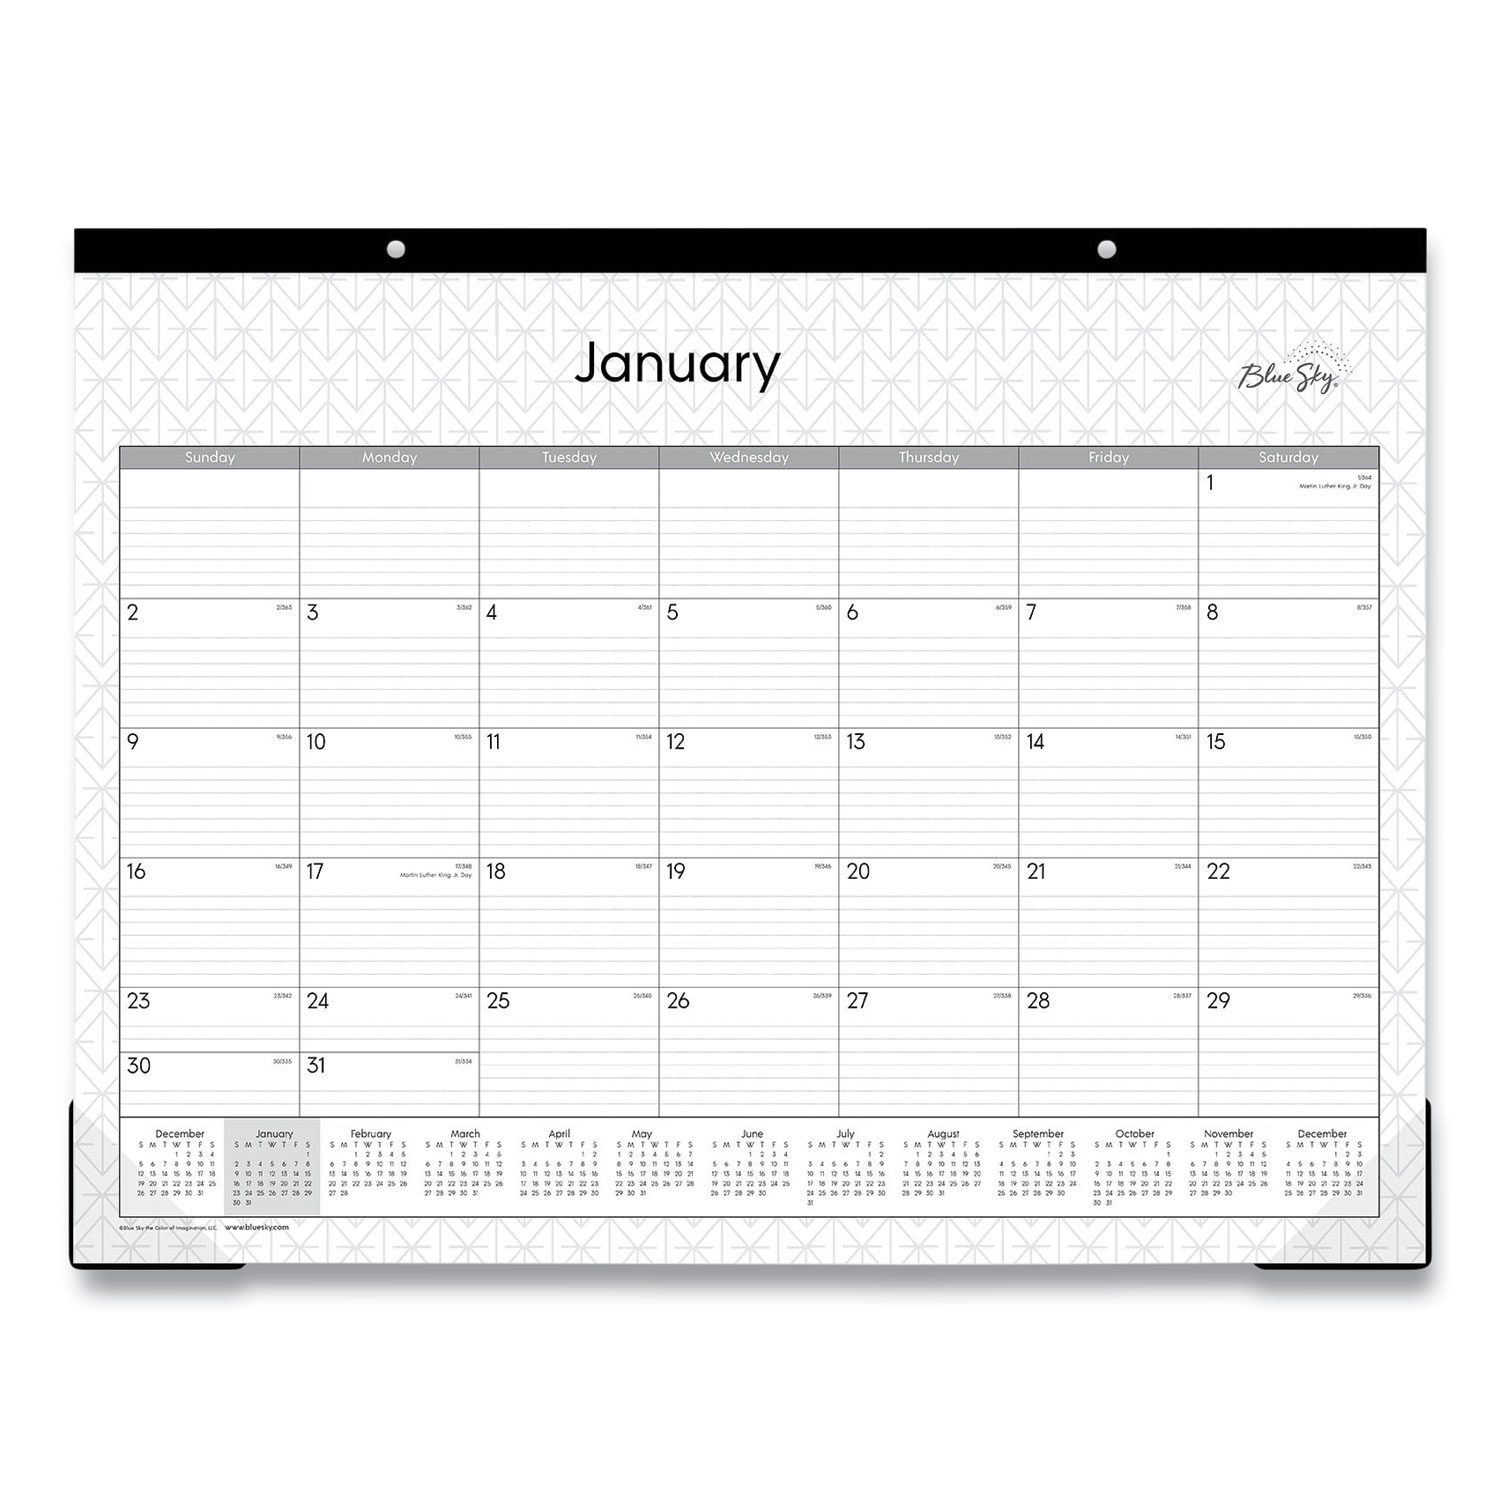 Large Desk Blotter Graph Paper Pad for Office Supplies (17 x 12